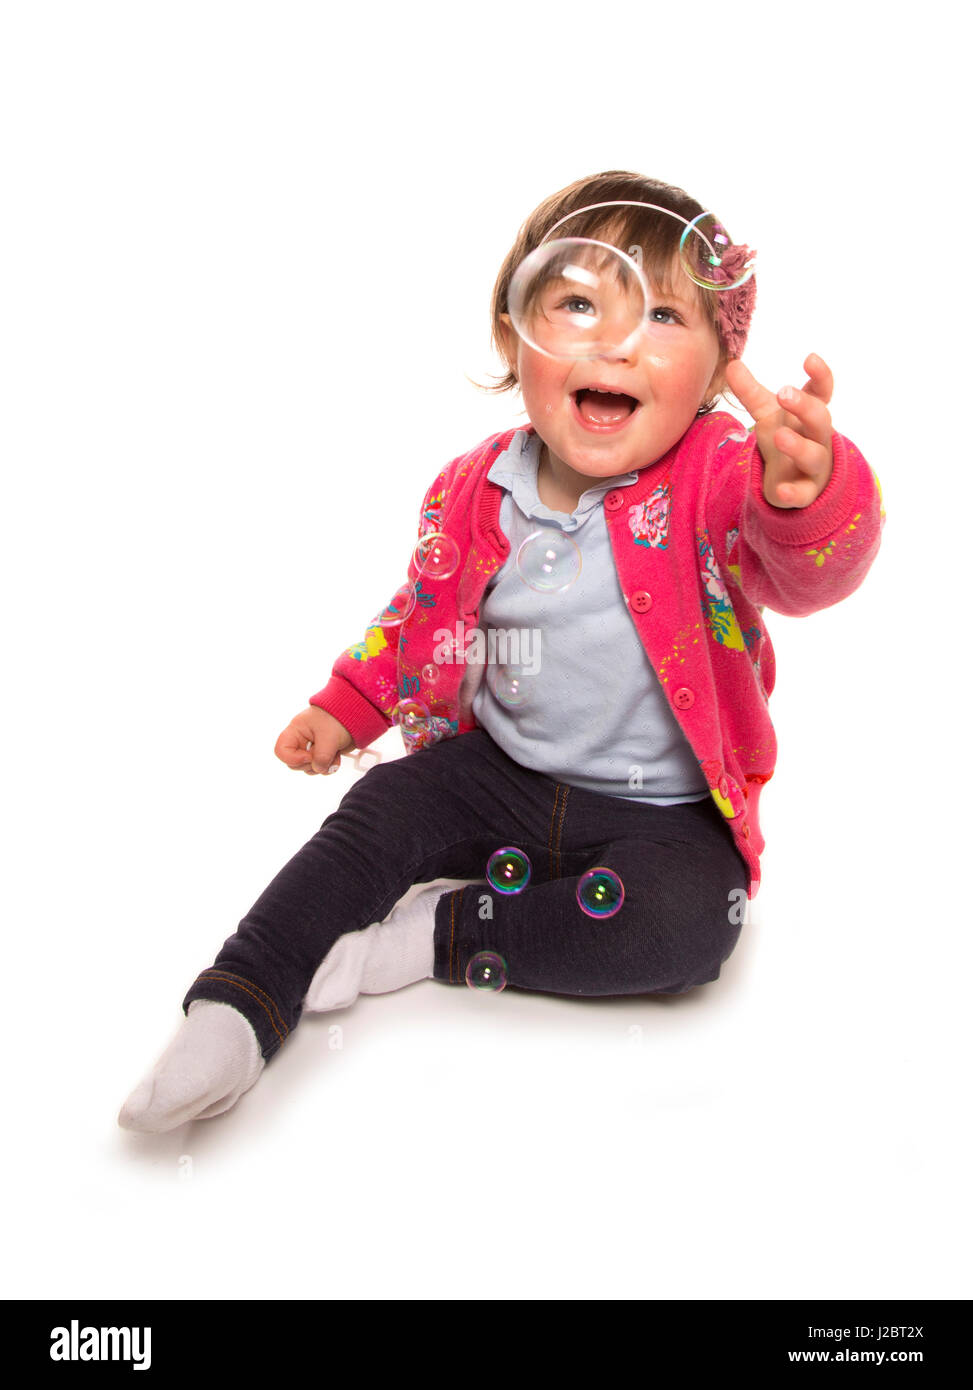 toddler playing with bubbles in a studio Stock Photo